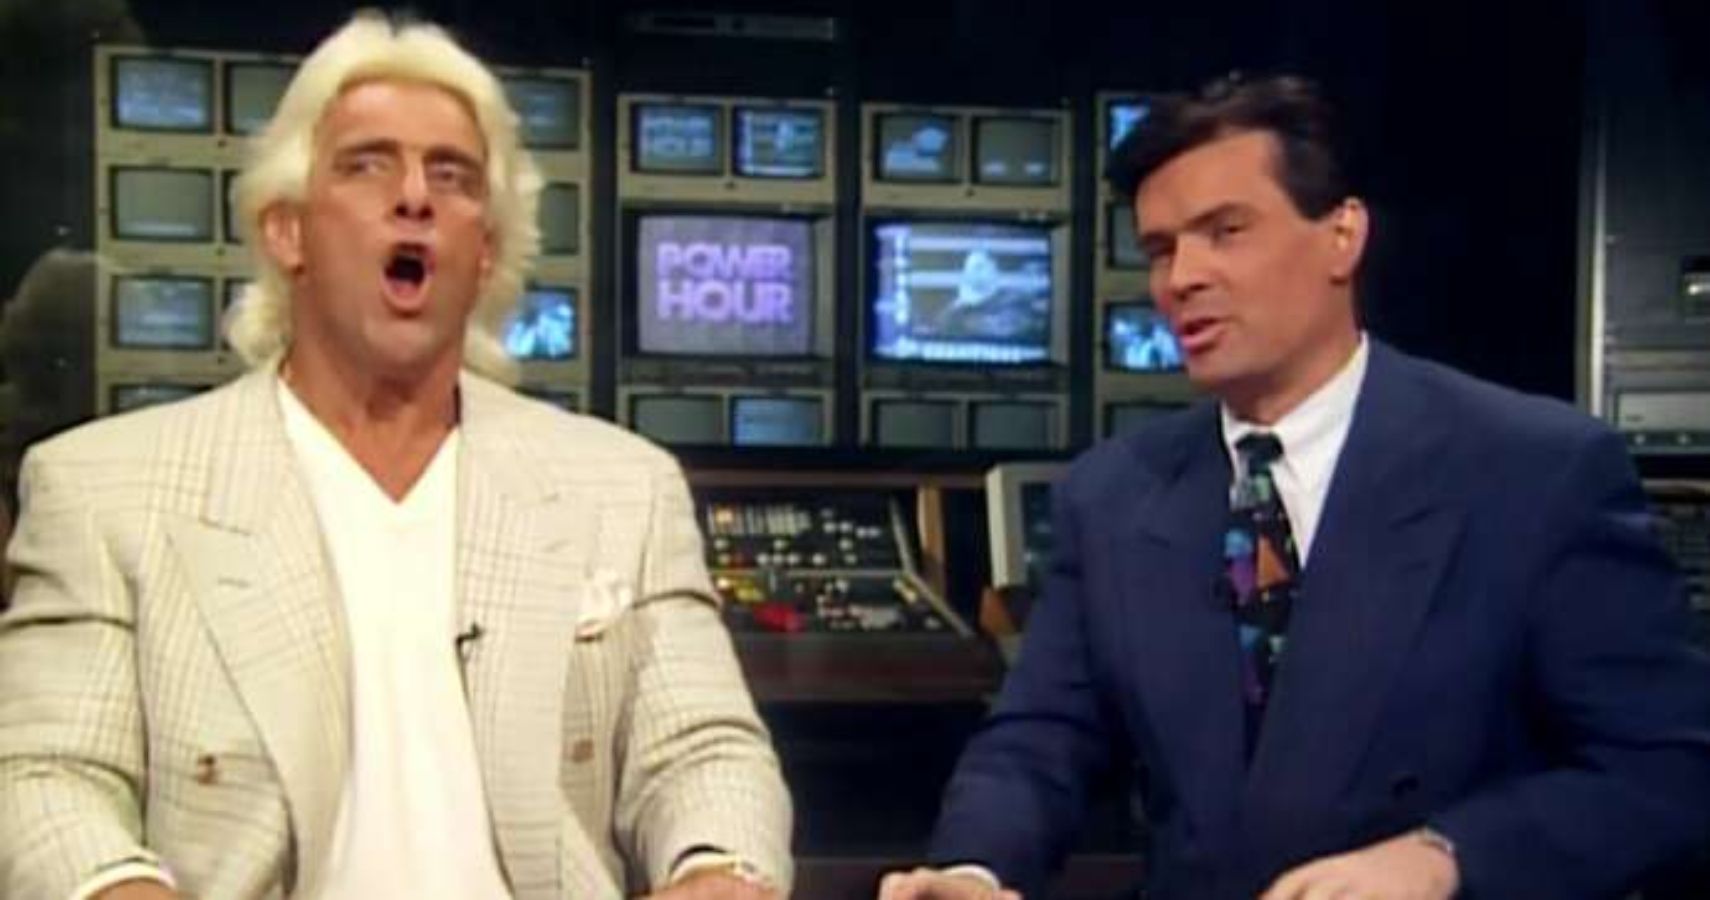 Ric Flair and Eric Bischoff can't stand each other